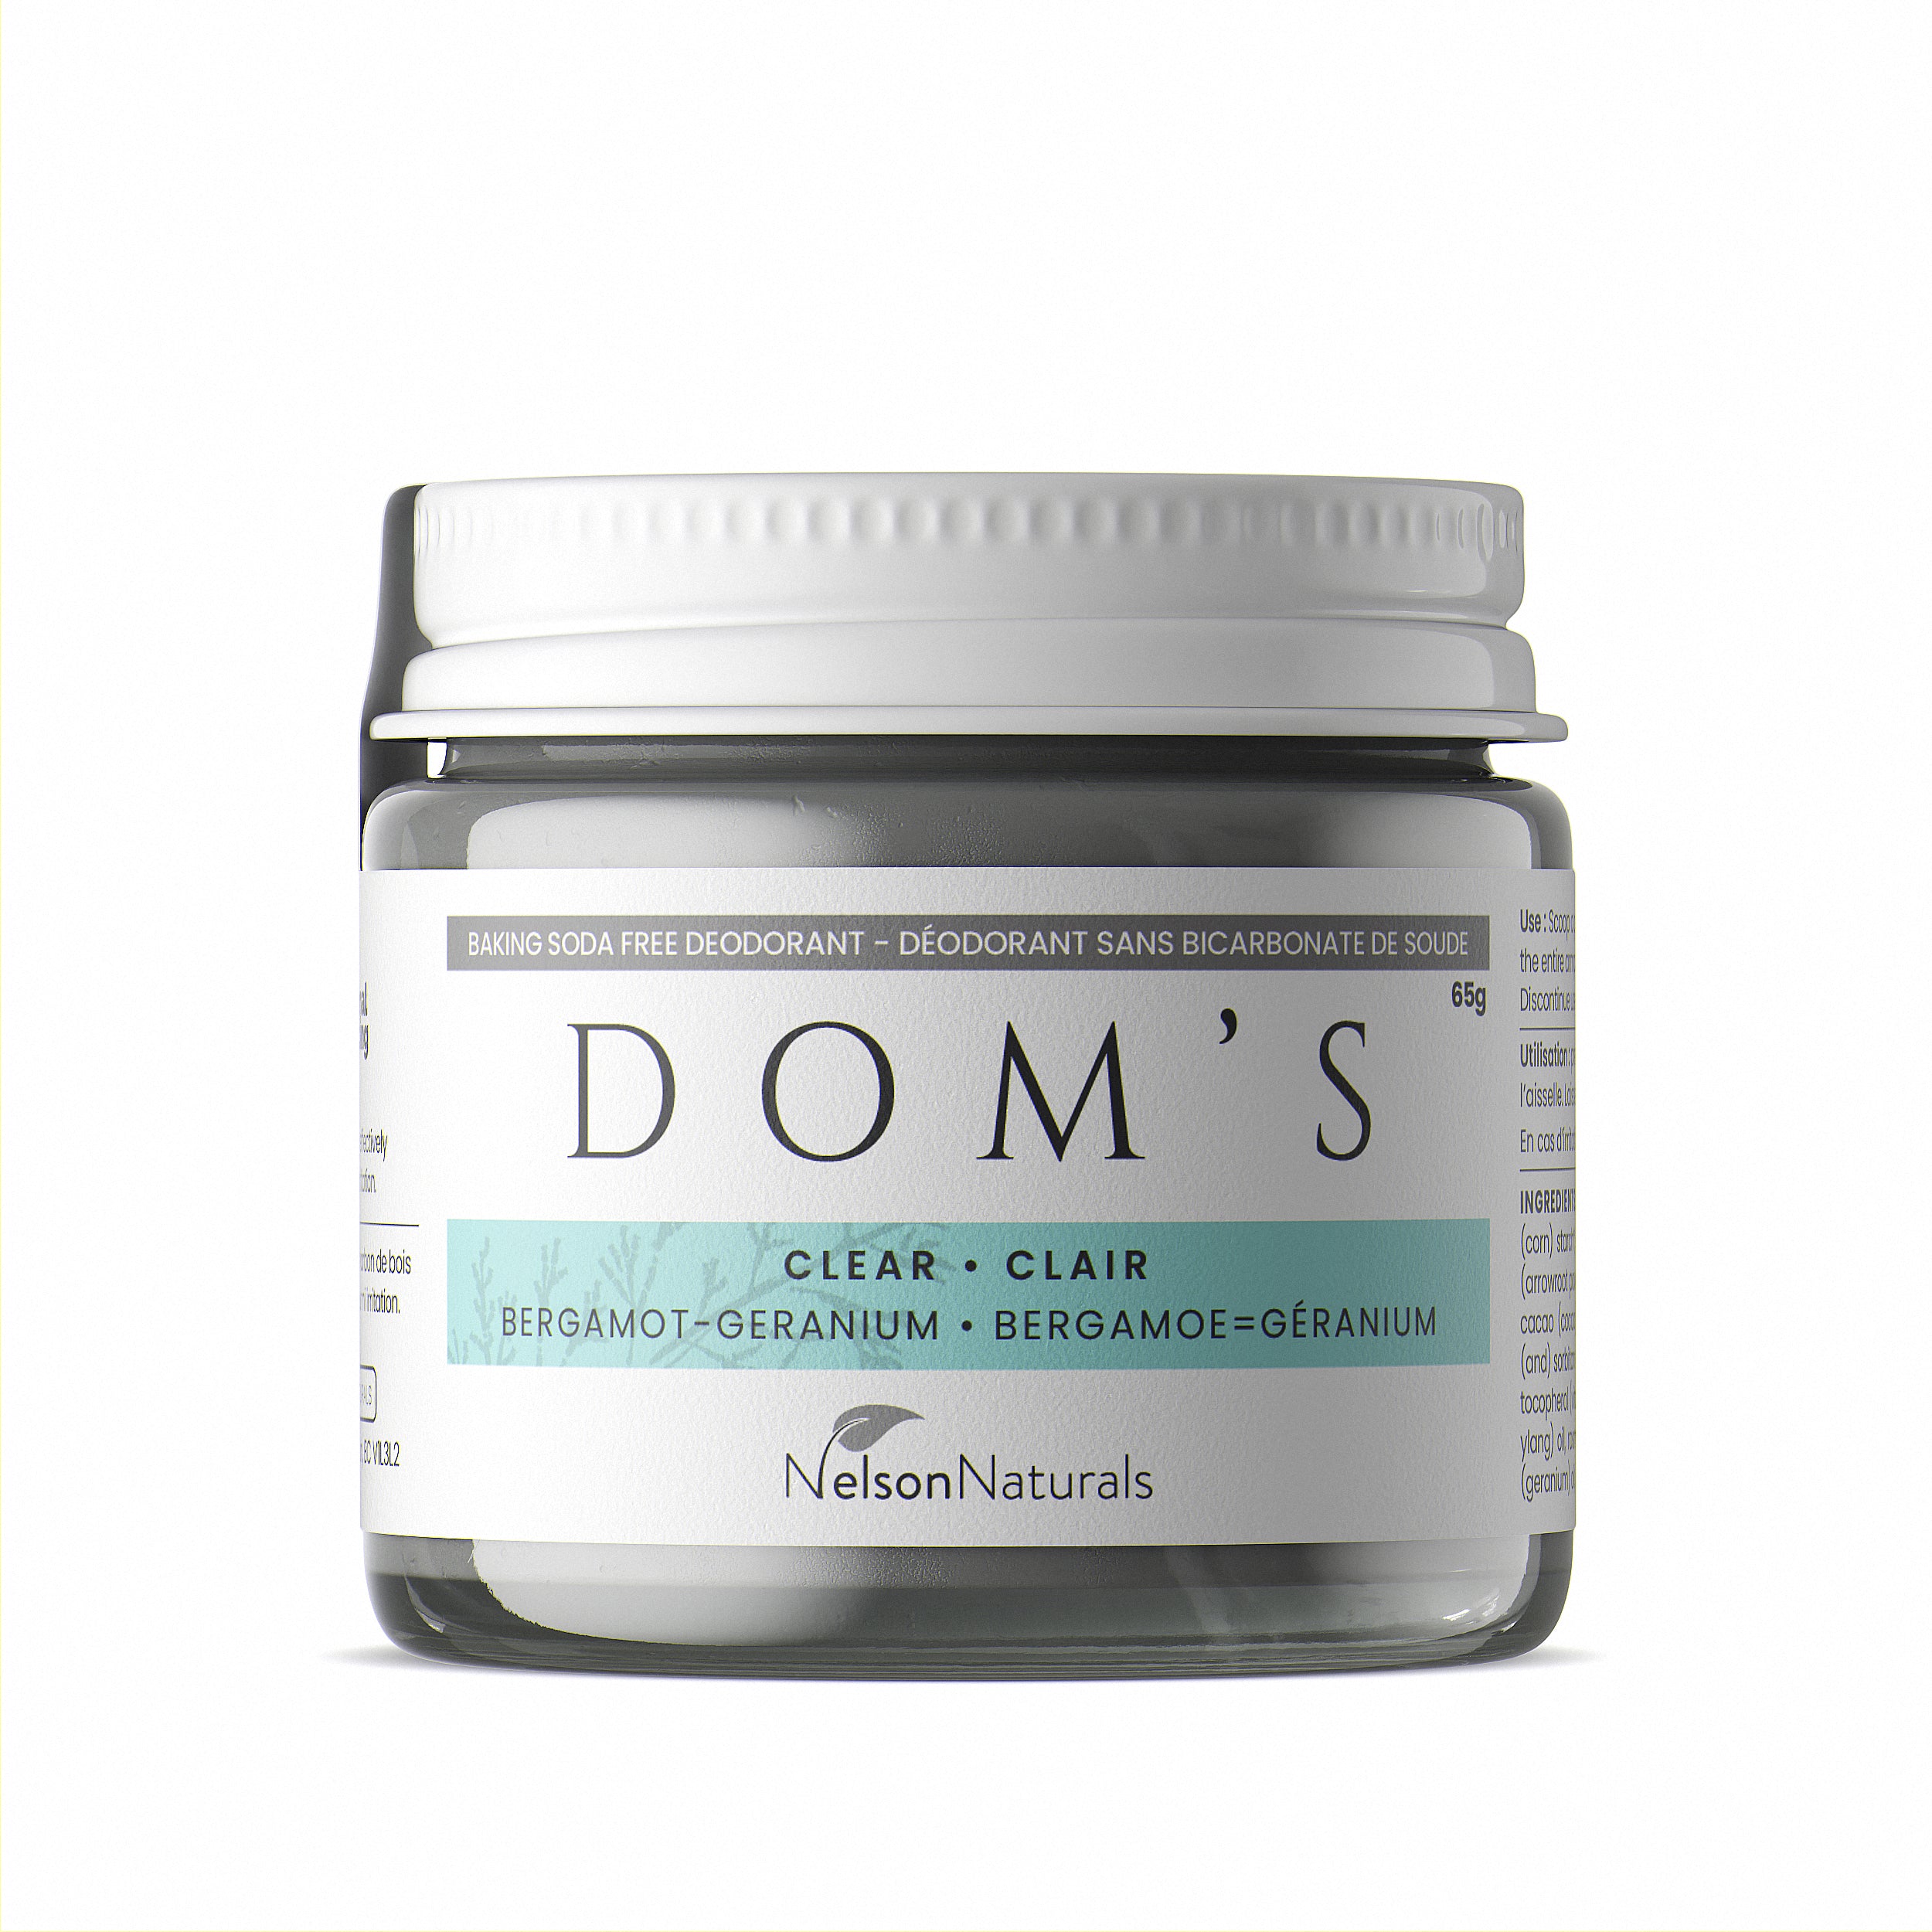 Dom's Deodorant - Clear (baking soda free) 65g - WHOLESALE Deodorant - nelsonnaturals remineralizing toothpaste